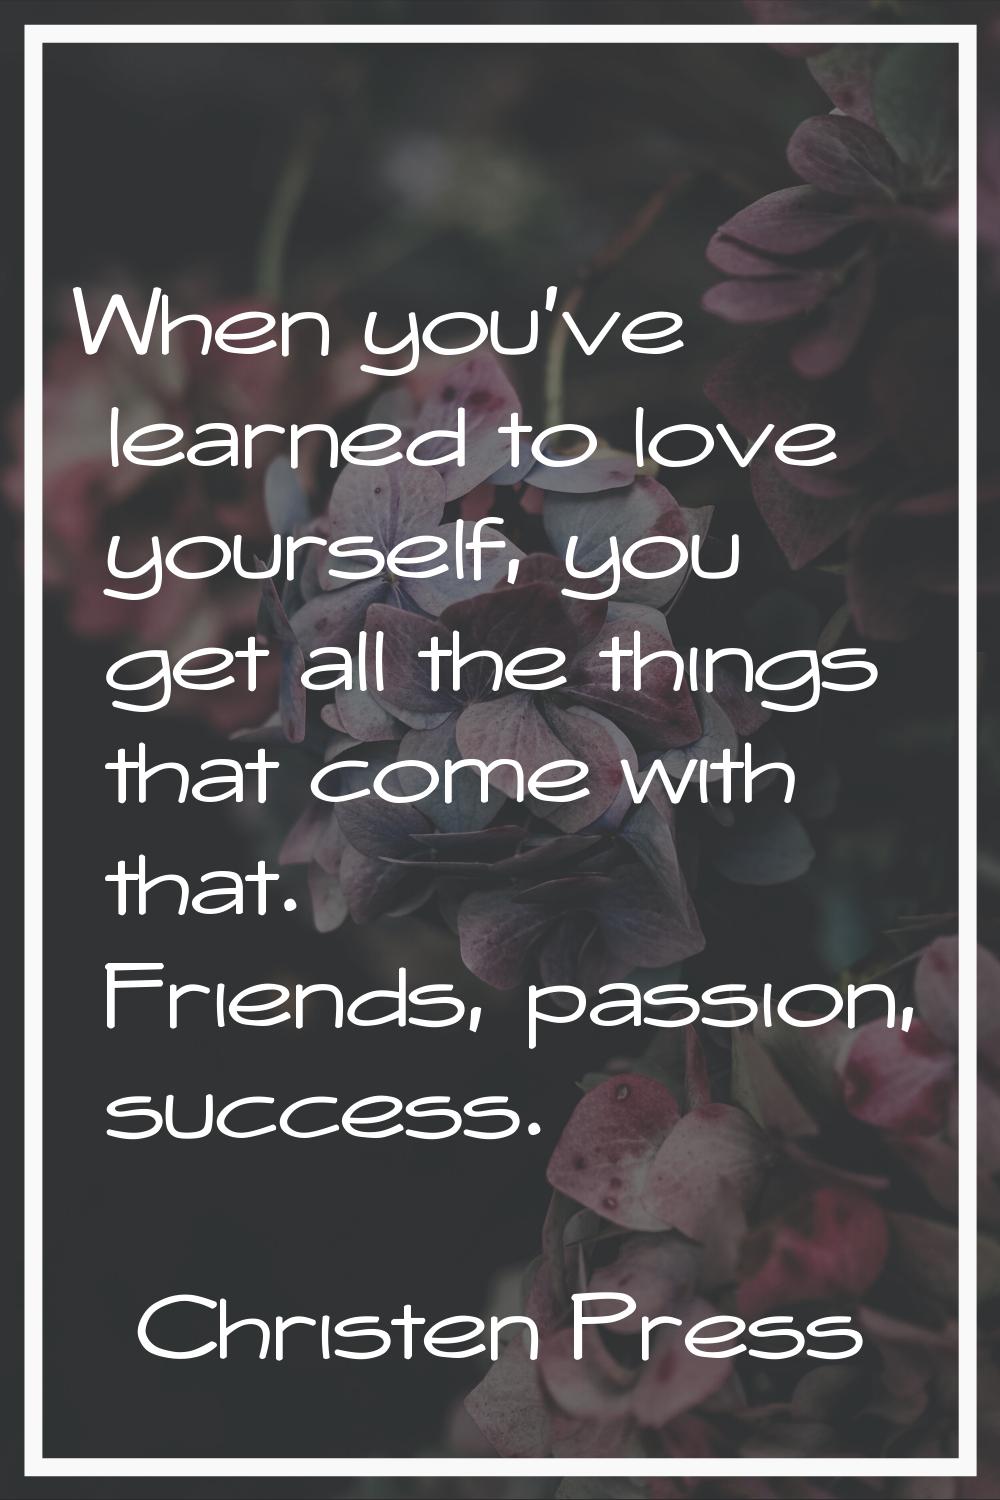 When you've learned to love yourself, you get all the things that come with that. Friends, passion,